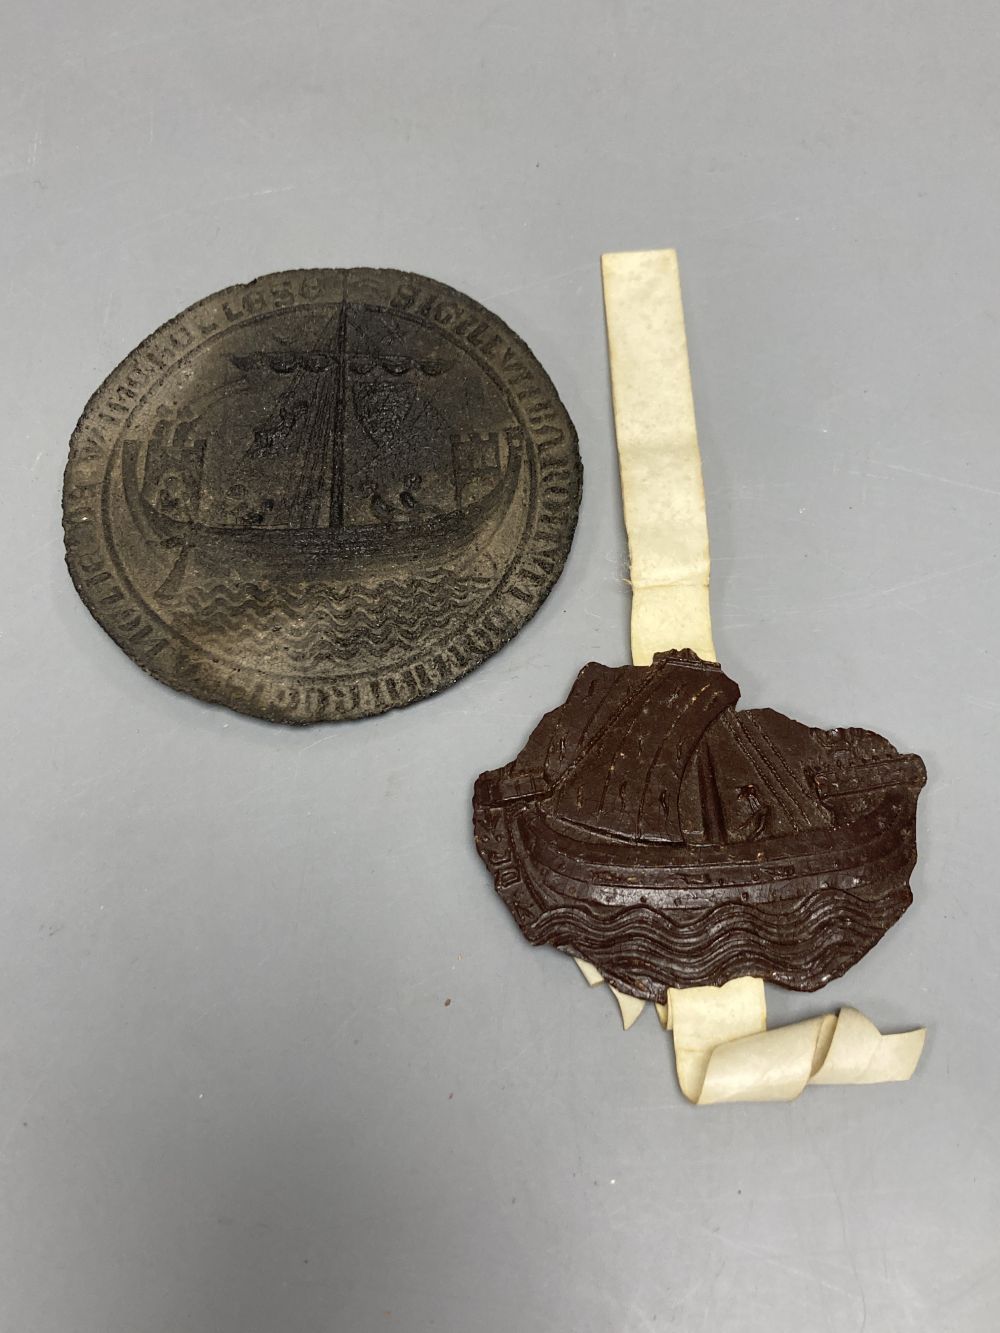 A 13th/14th century wax seal fragment of the Barony of Rye and an impression of the seal of Winchelsea, largest 8.5cm